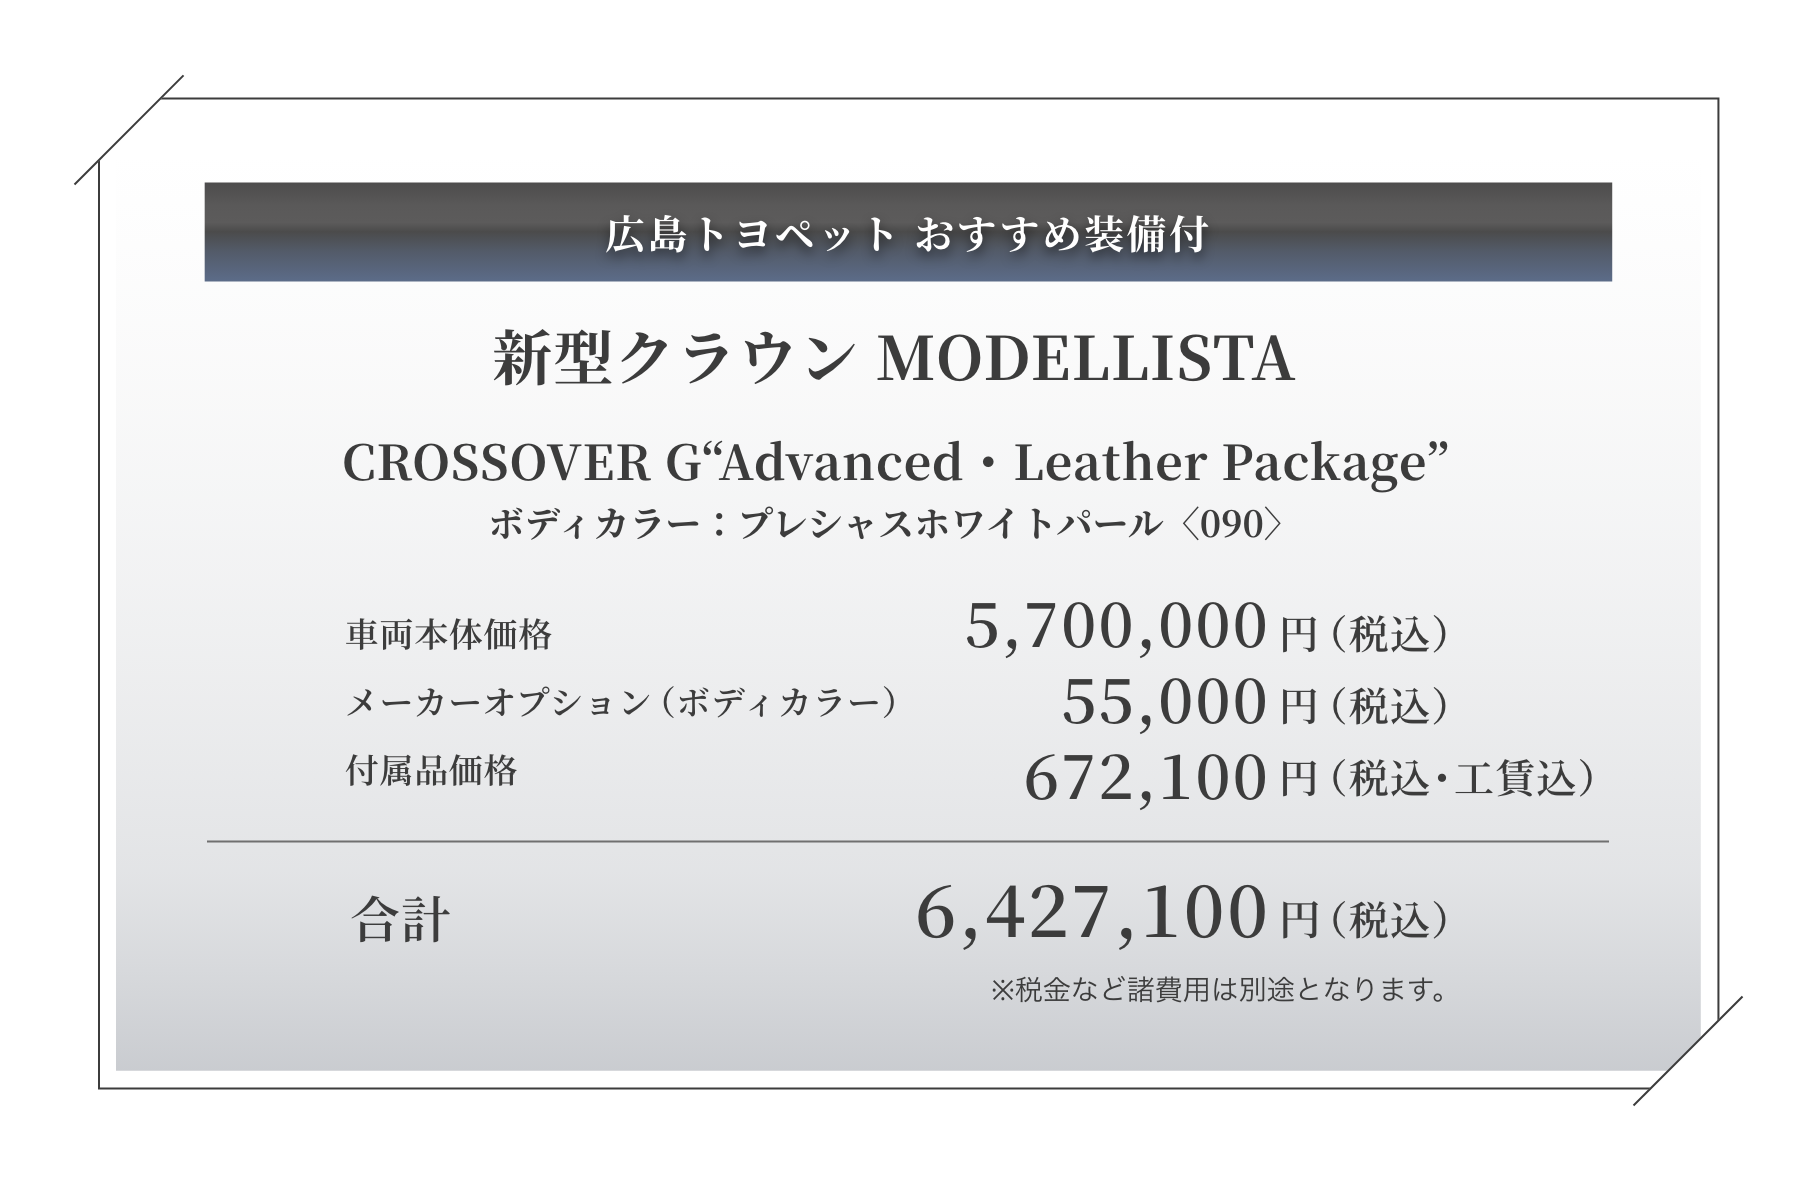 CROSSOVER G“Advanced・Leather Package”ボディカラー：プレシャスホワイトパール〈090〉